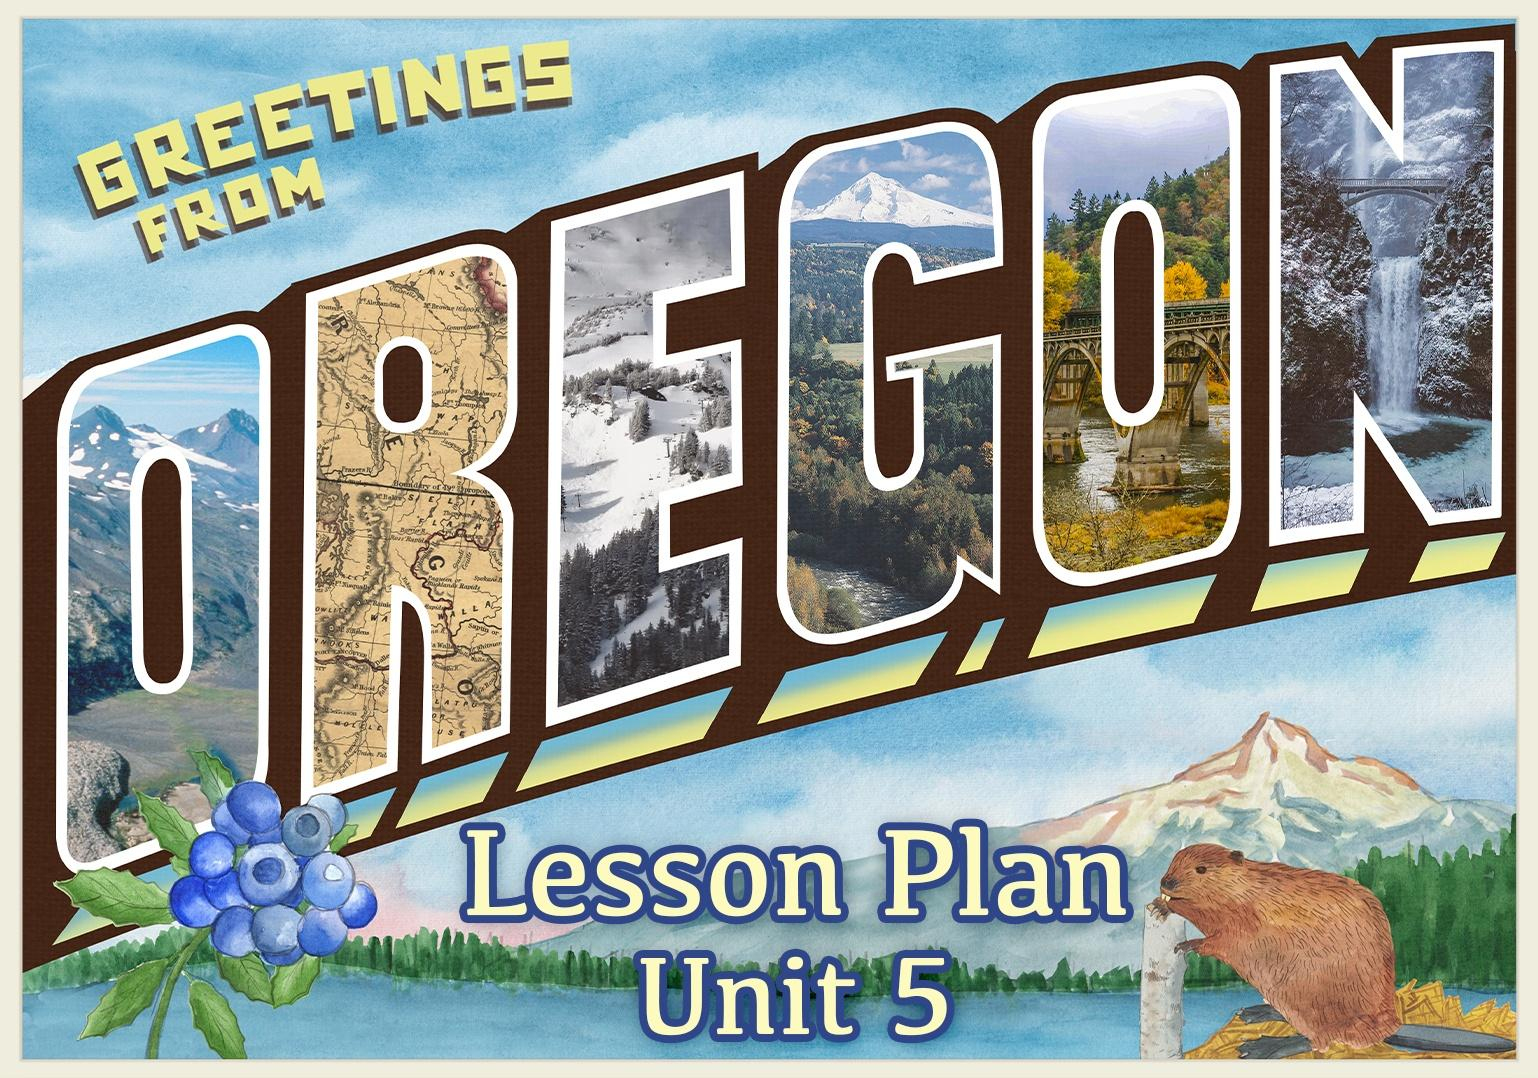 Oregon | Activity 5.1: The Path Of The Oregon Trail | Pbs